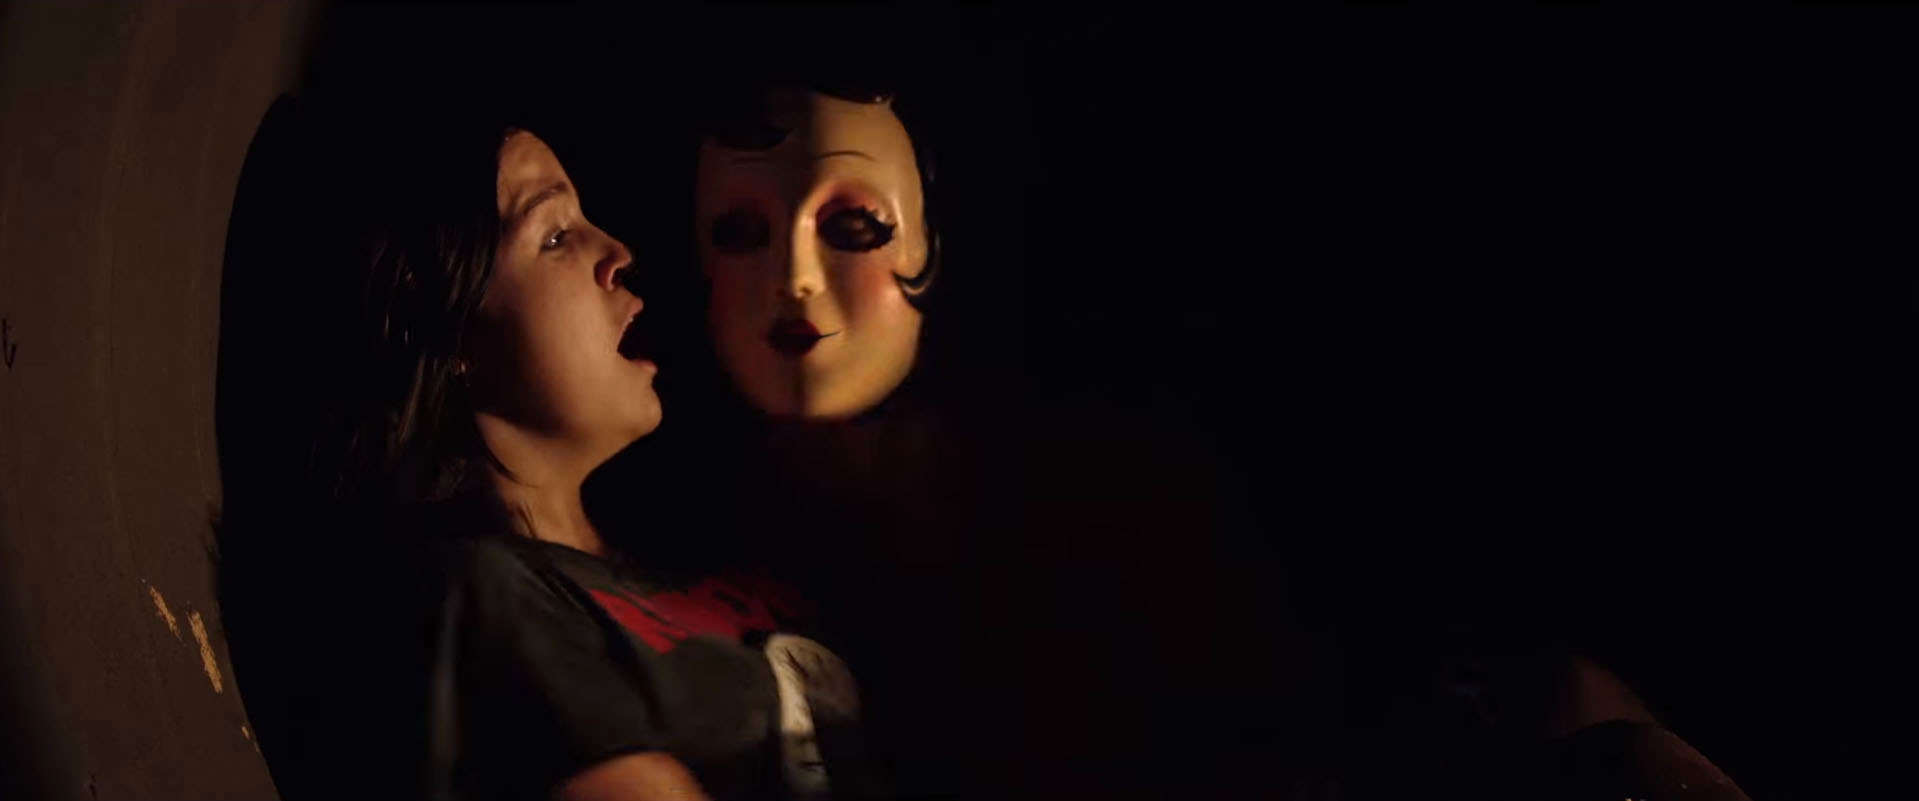 The Strangers: Prey at Night: A woman in a mask sits beside a terrified woman